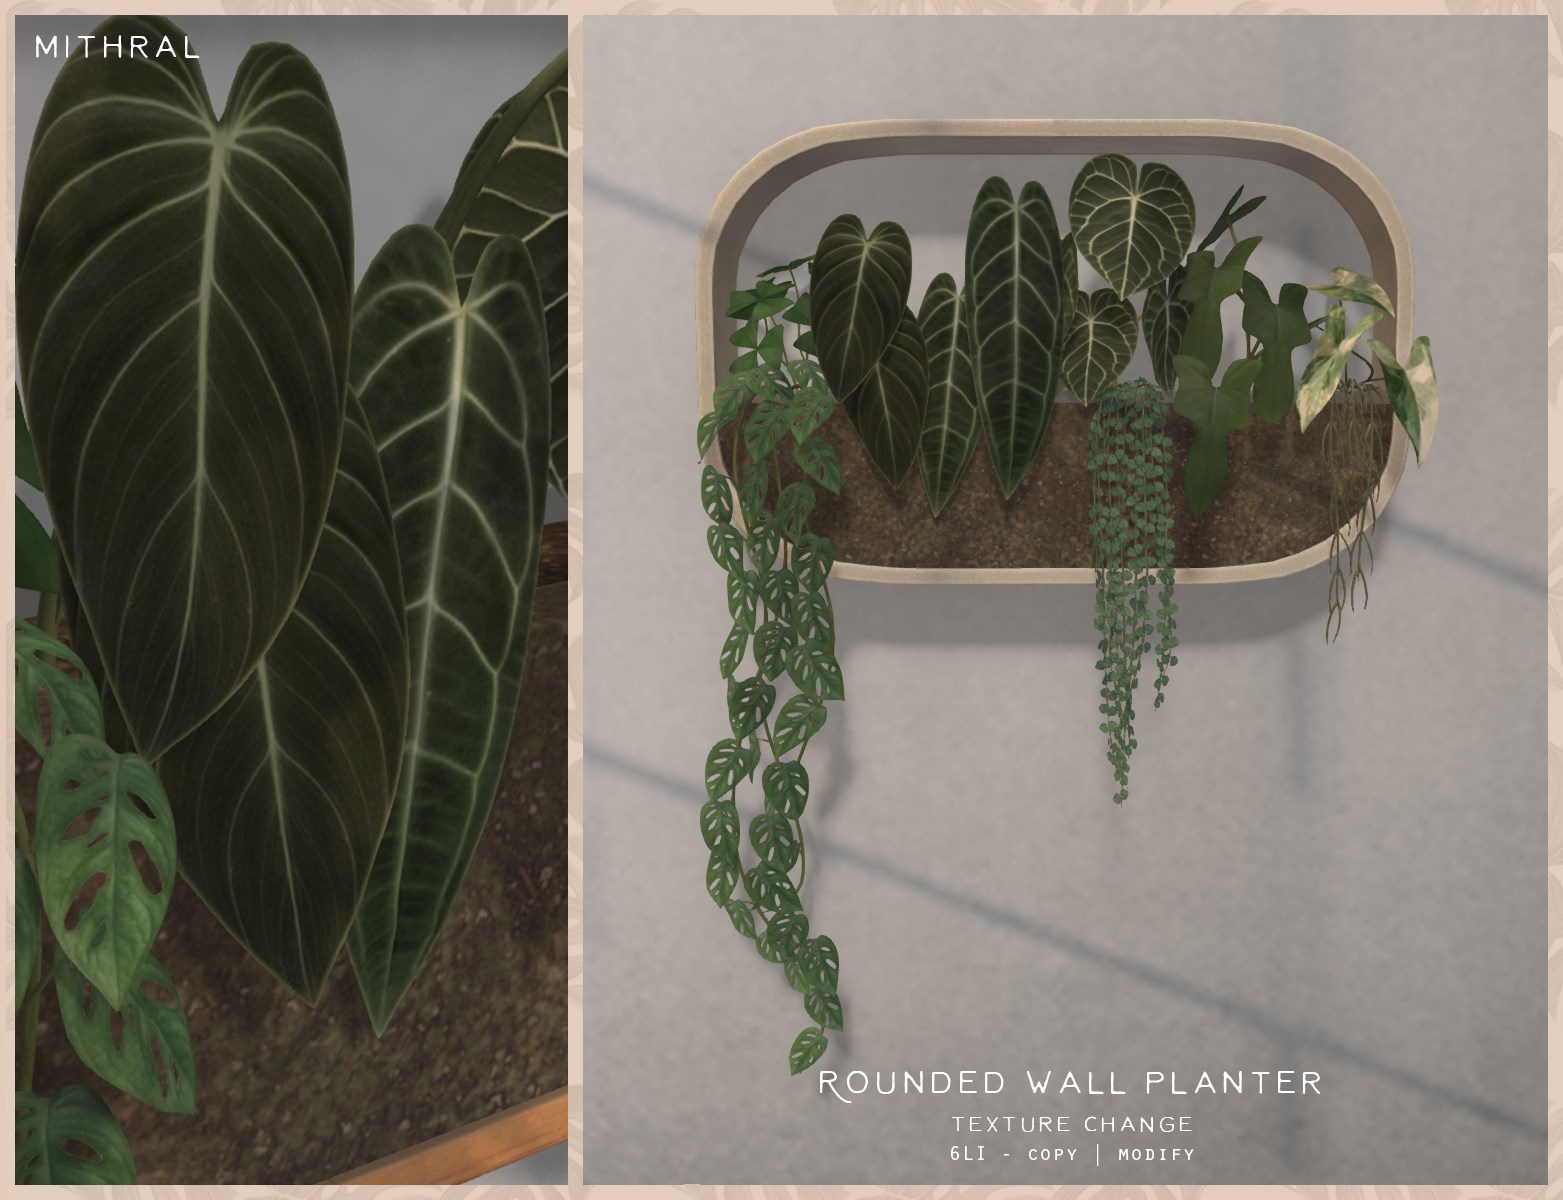 Mithral – Rounded Wall Planter